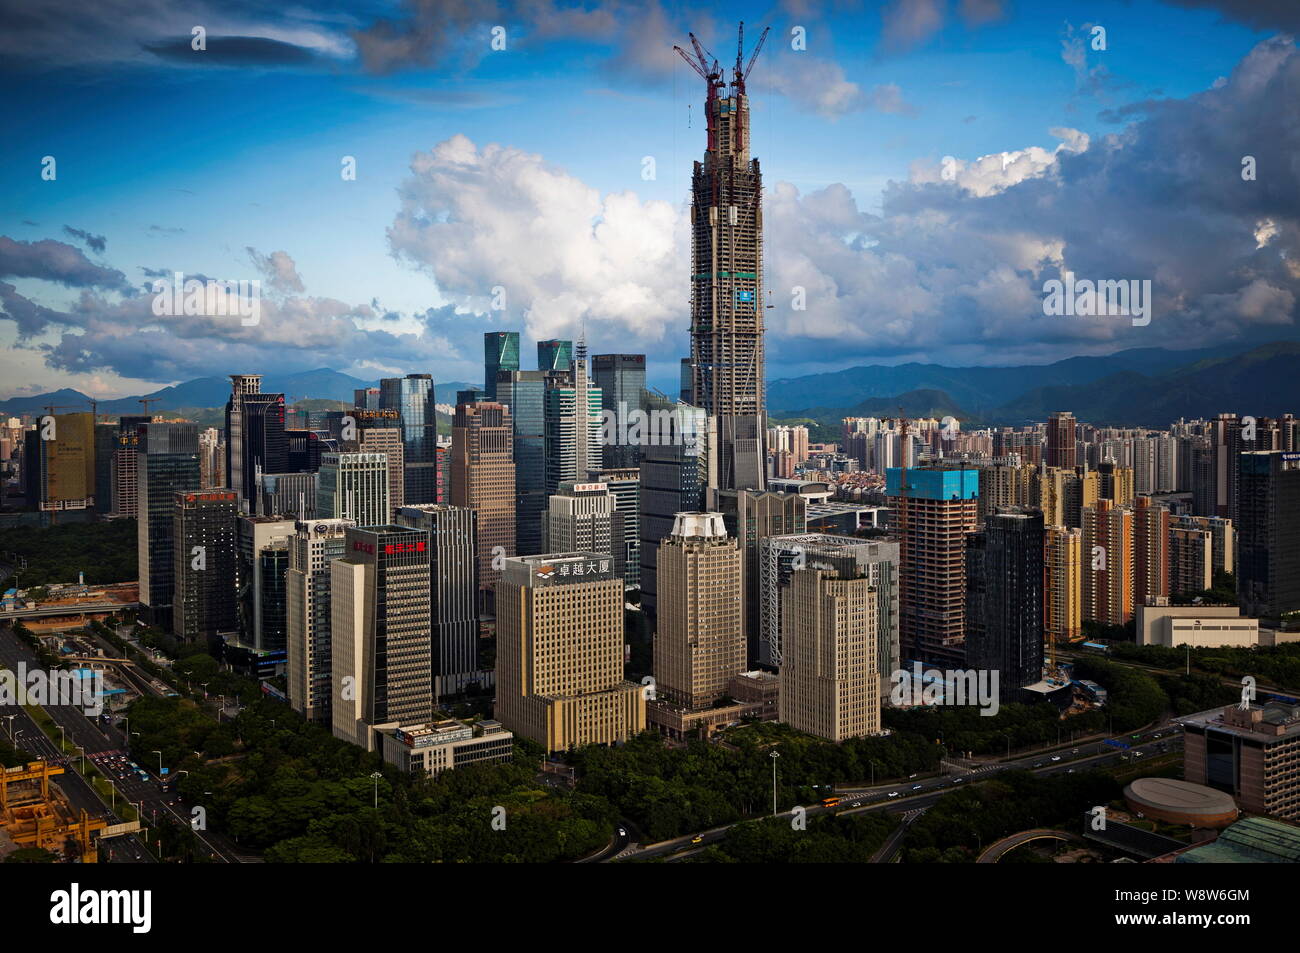 View of the Ping An International Finance Center (IFC) Tower under construction, tallest, and other skyscrapers and high-rise buildings in Shenzhen ci Stock Photo